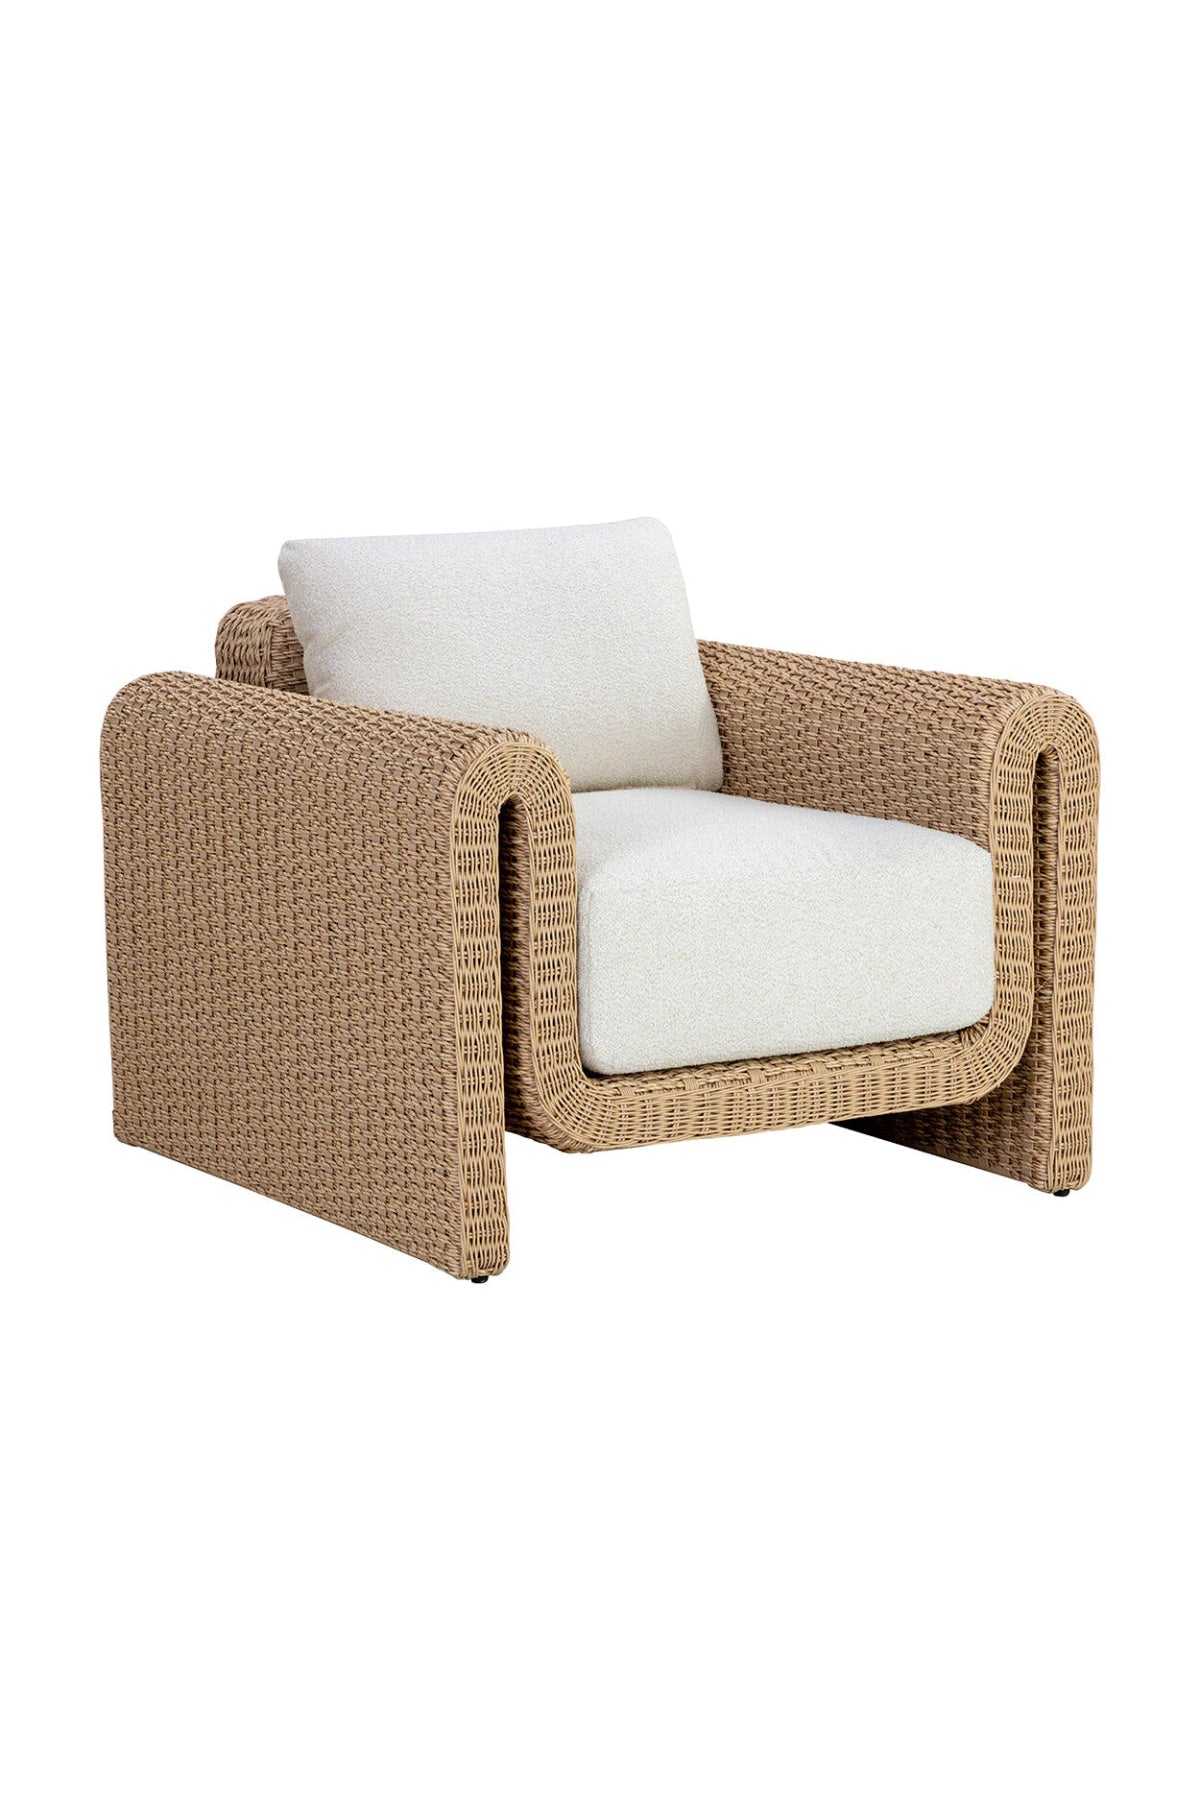 Corinth Outdoor Lounge Chair - 2 Colors